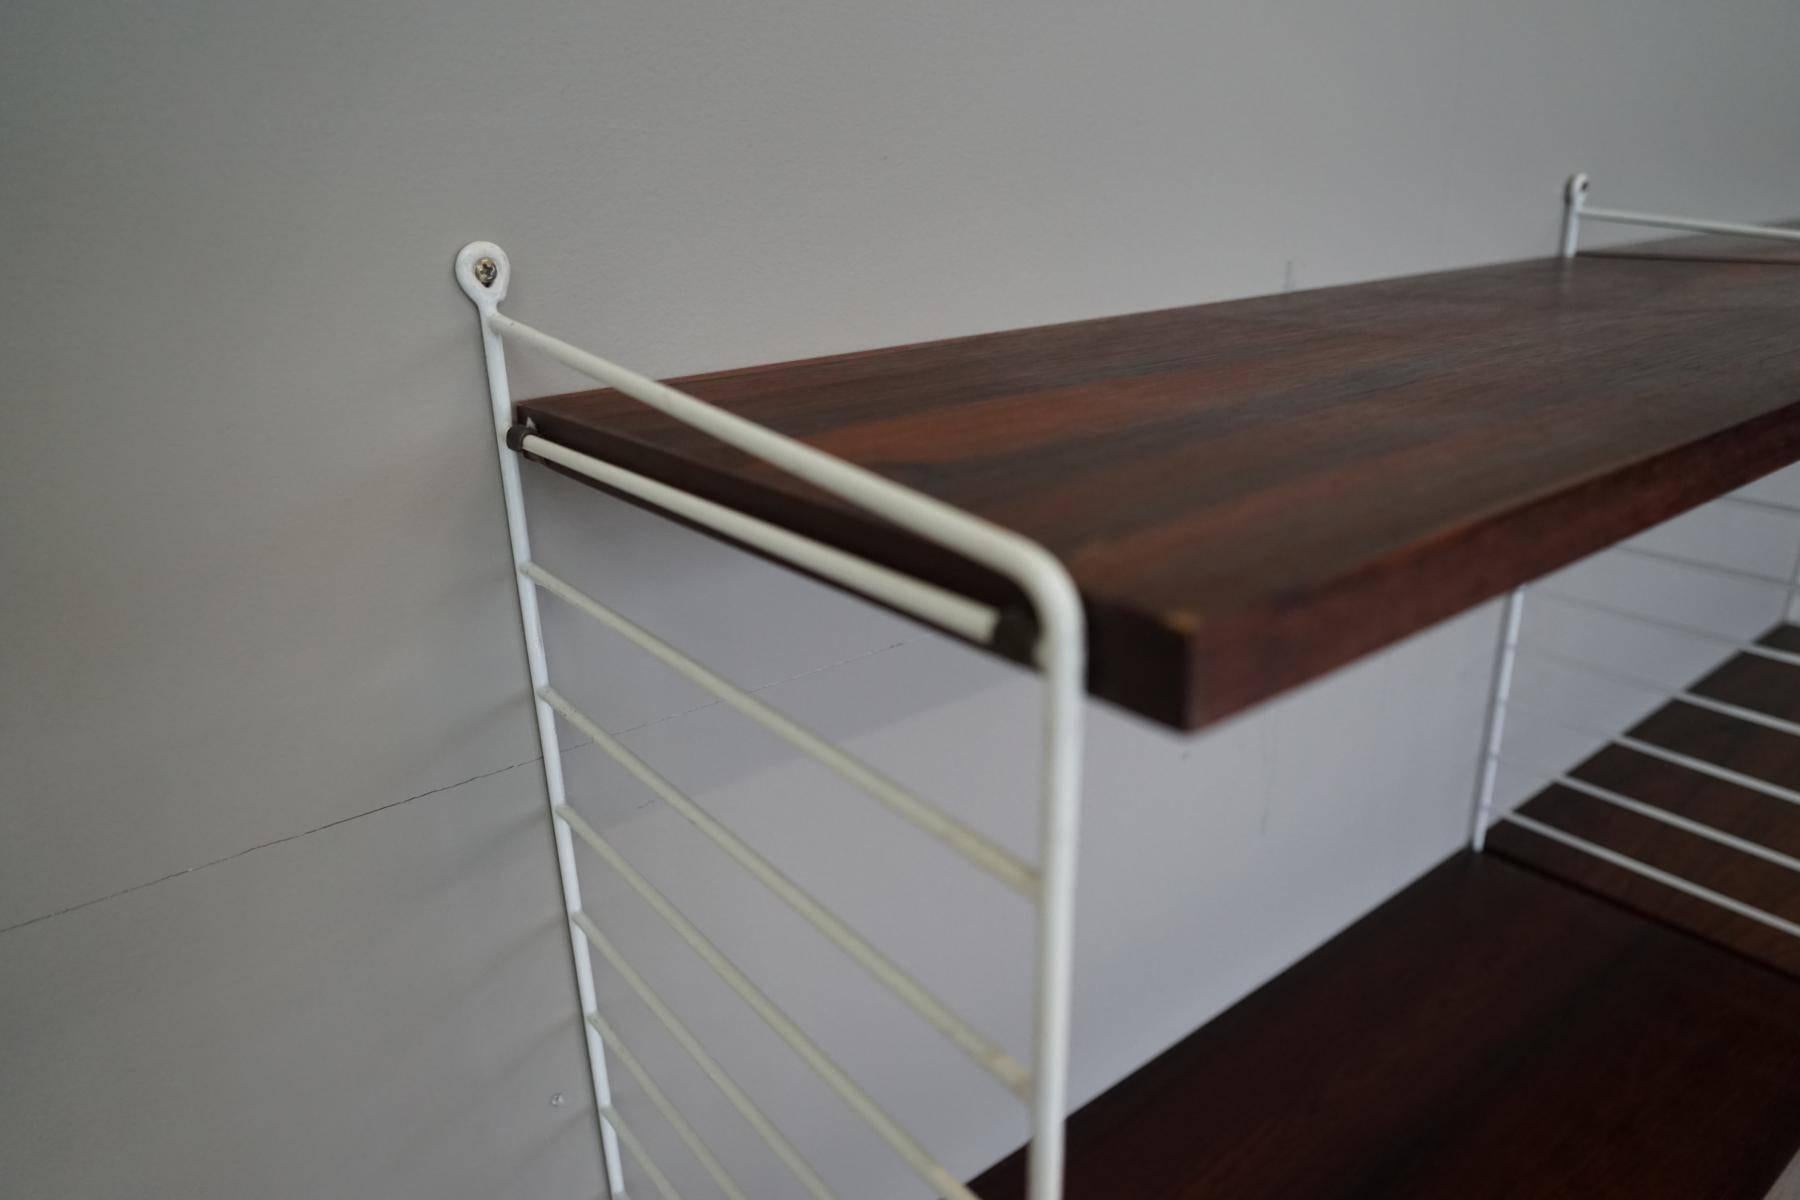 Metal Box and Wall Unit String Shelf Rack System by Nisse Strinning, 1960s For Sale